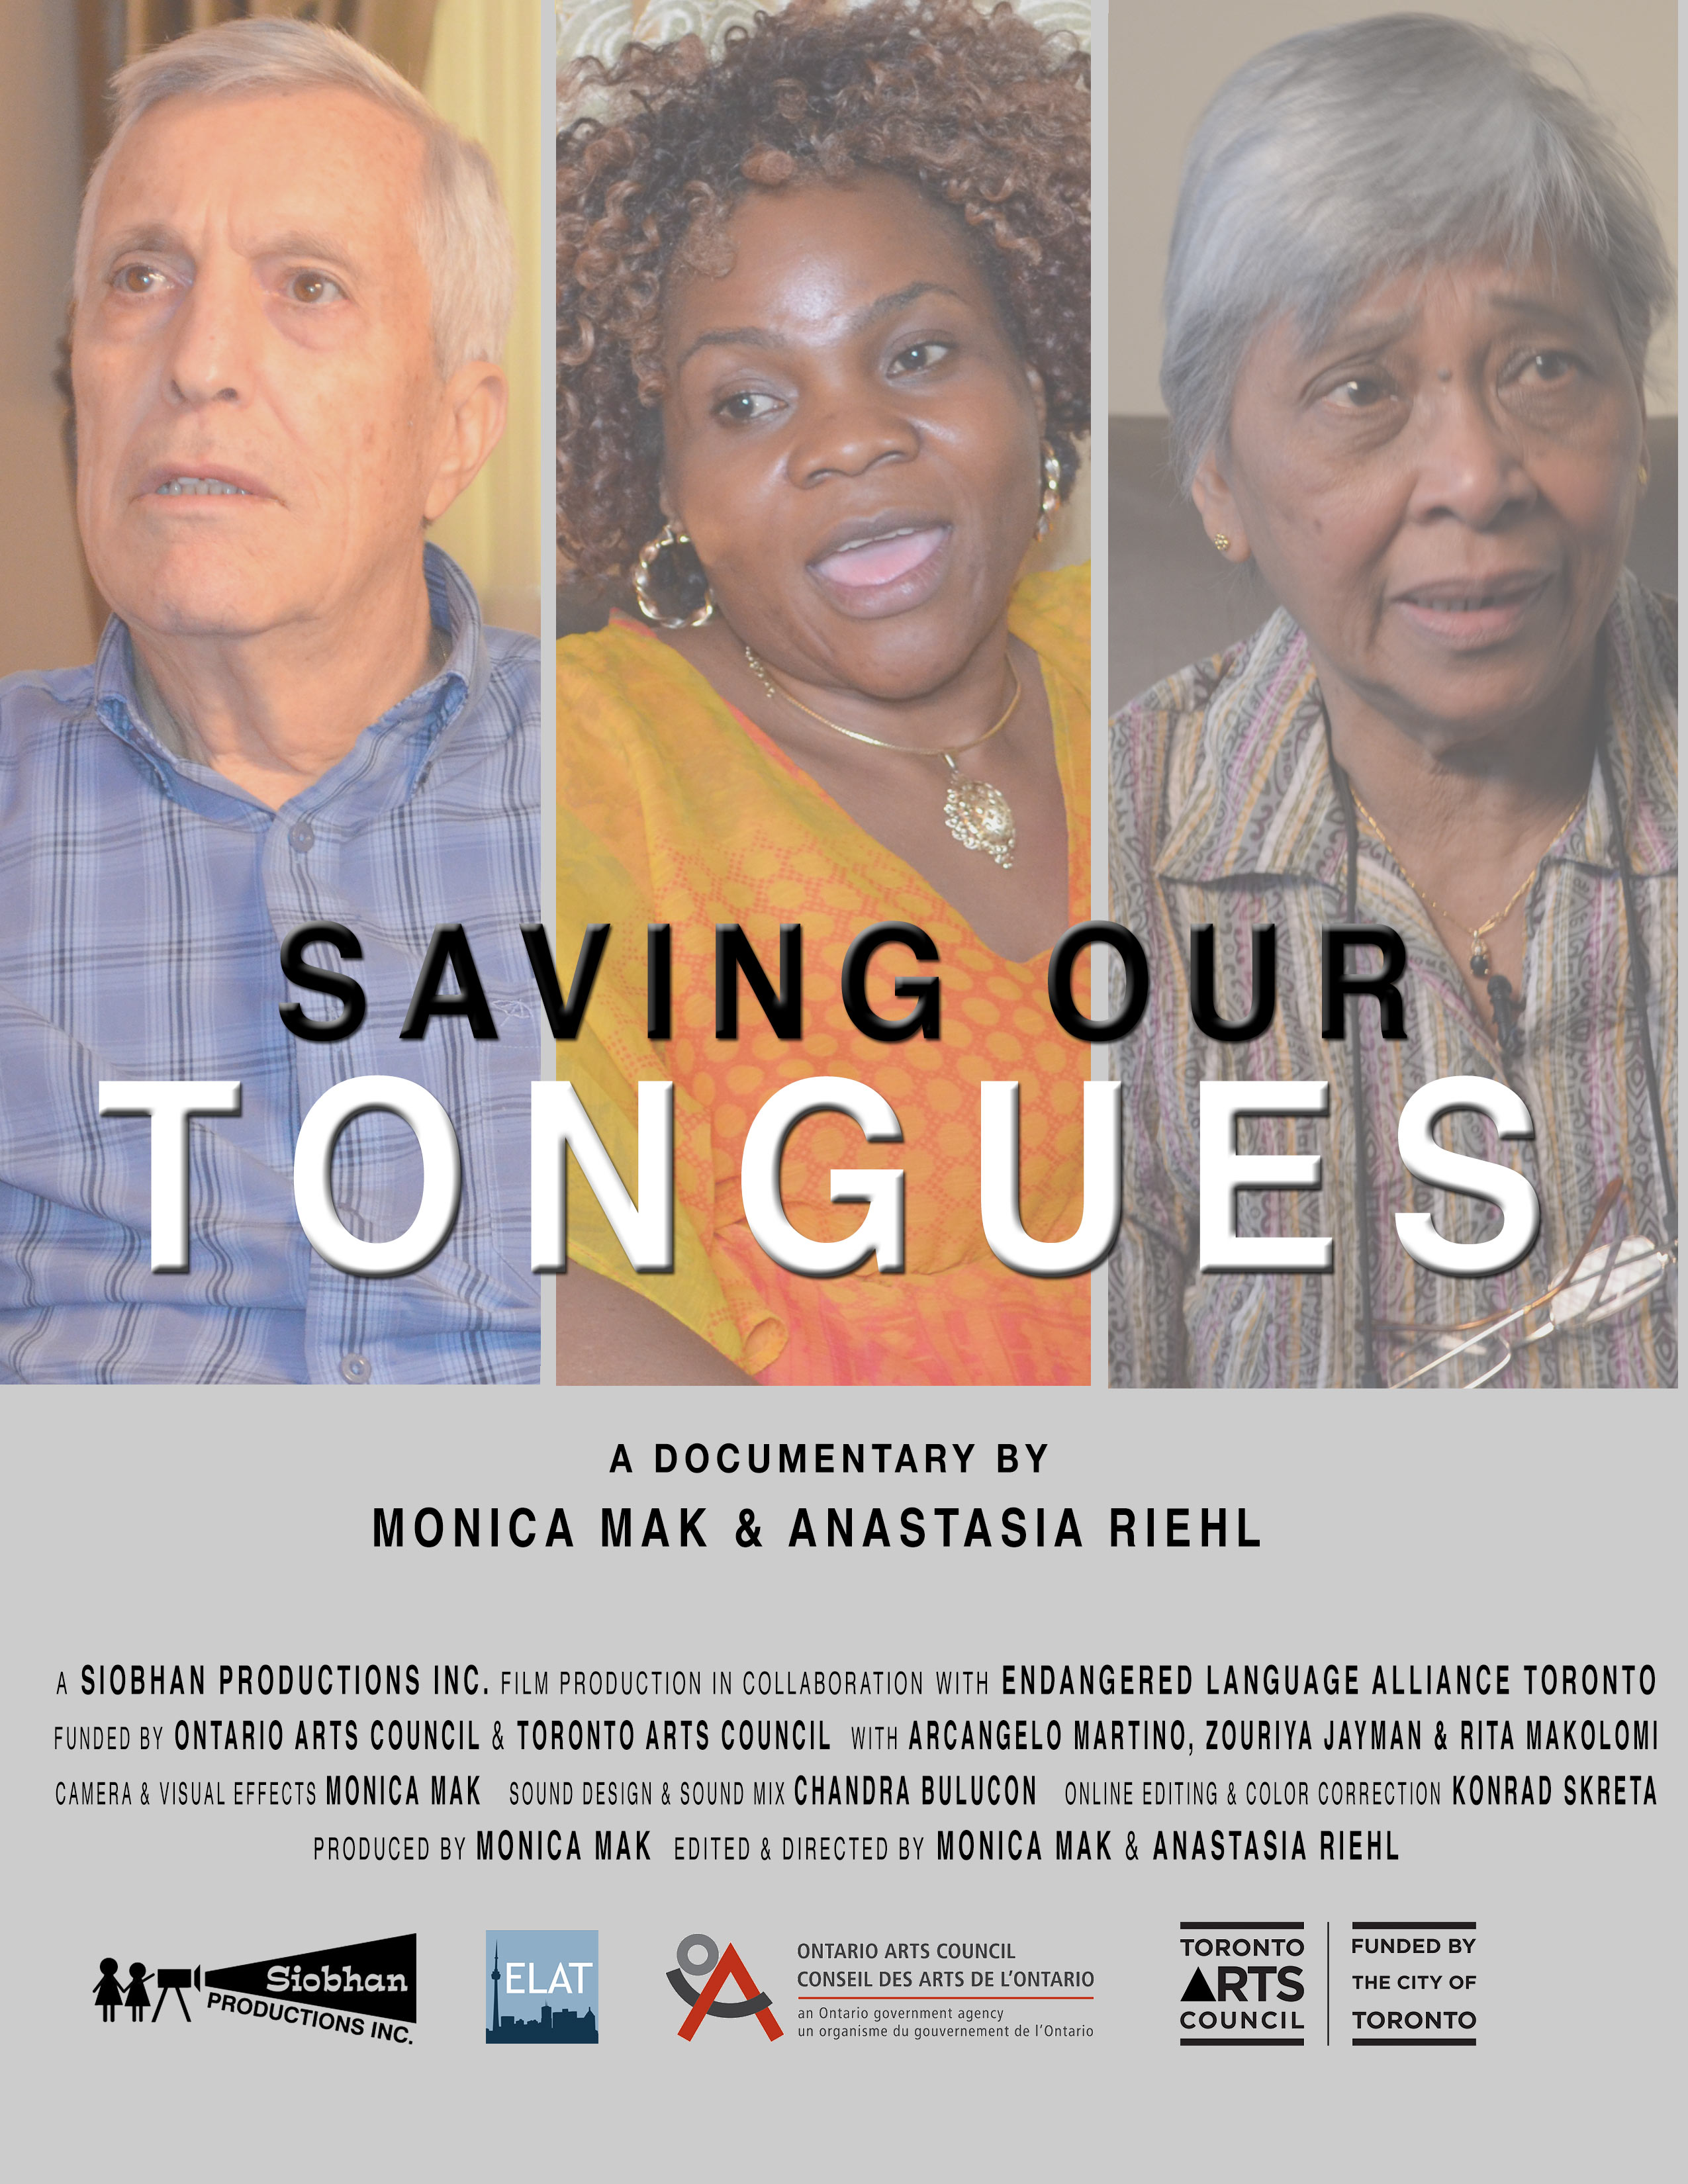 Poster for the documentary film Saving Our Tongues, featuring the photos of the three people interviewed in the film.